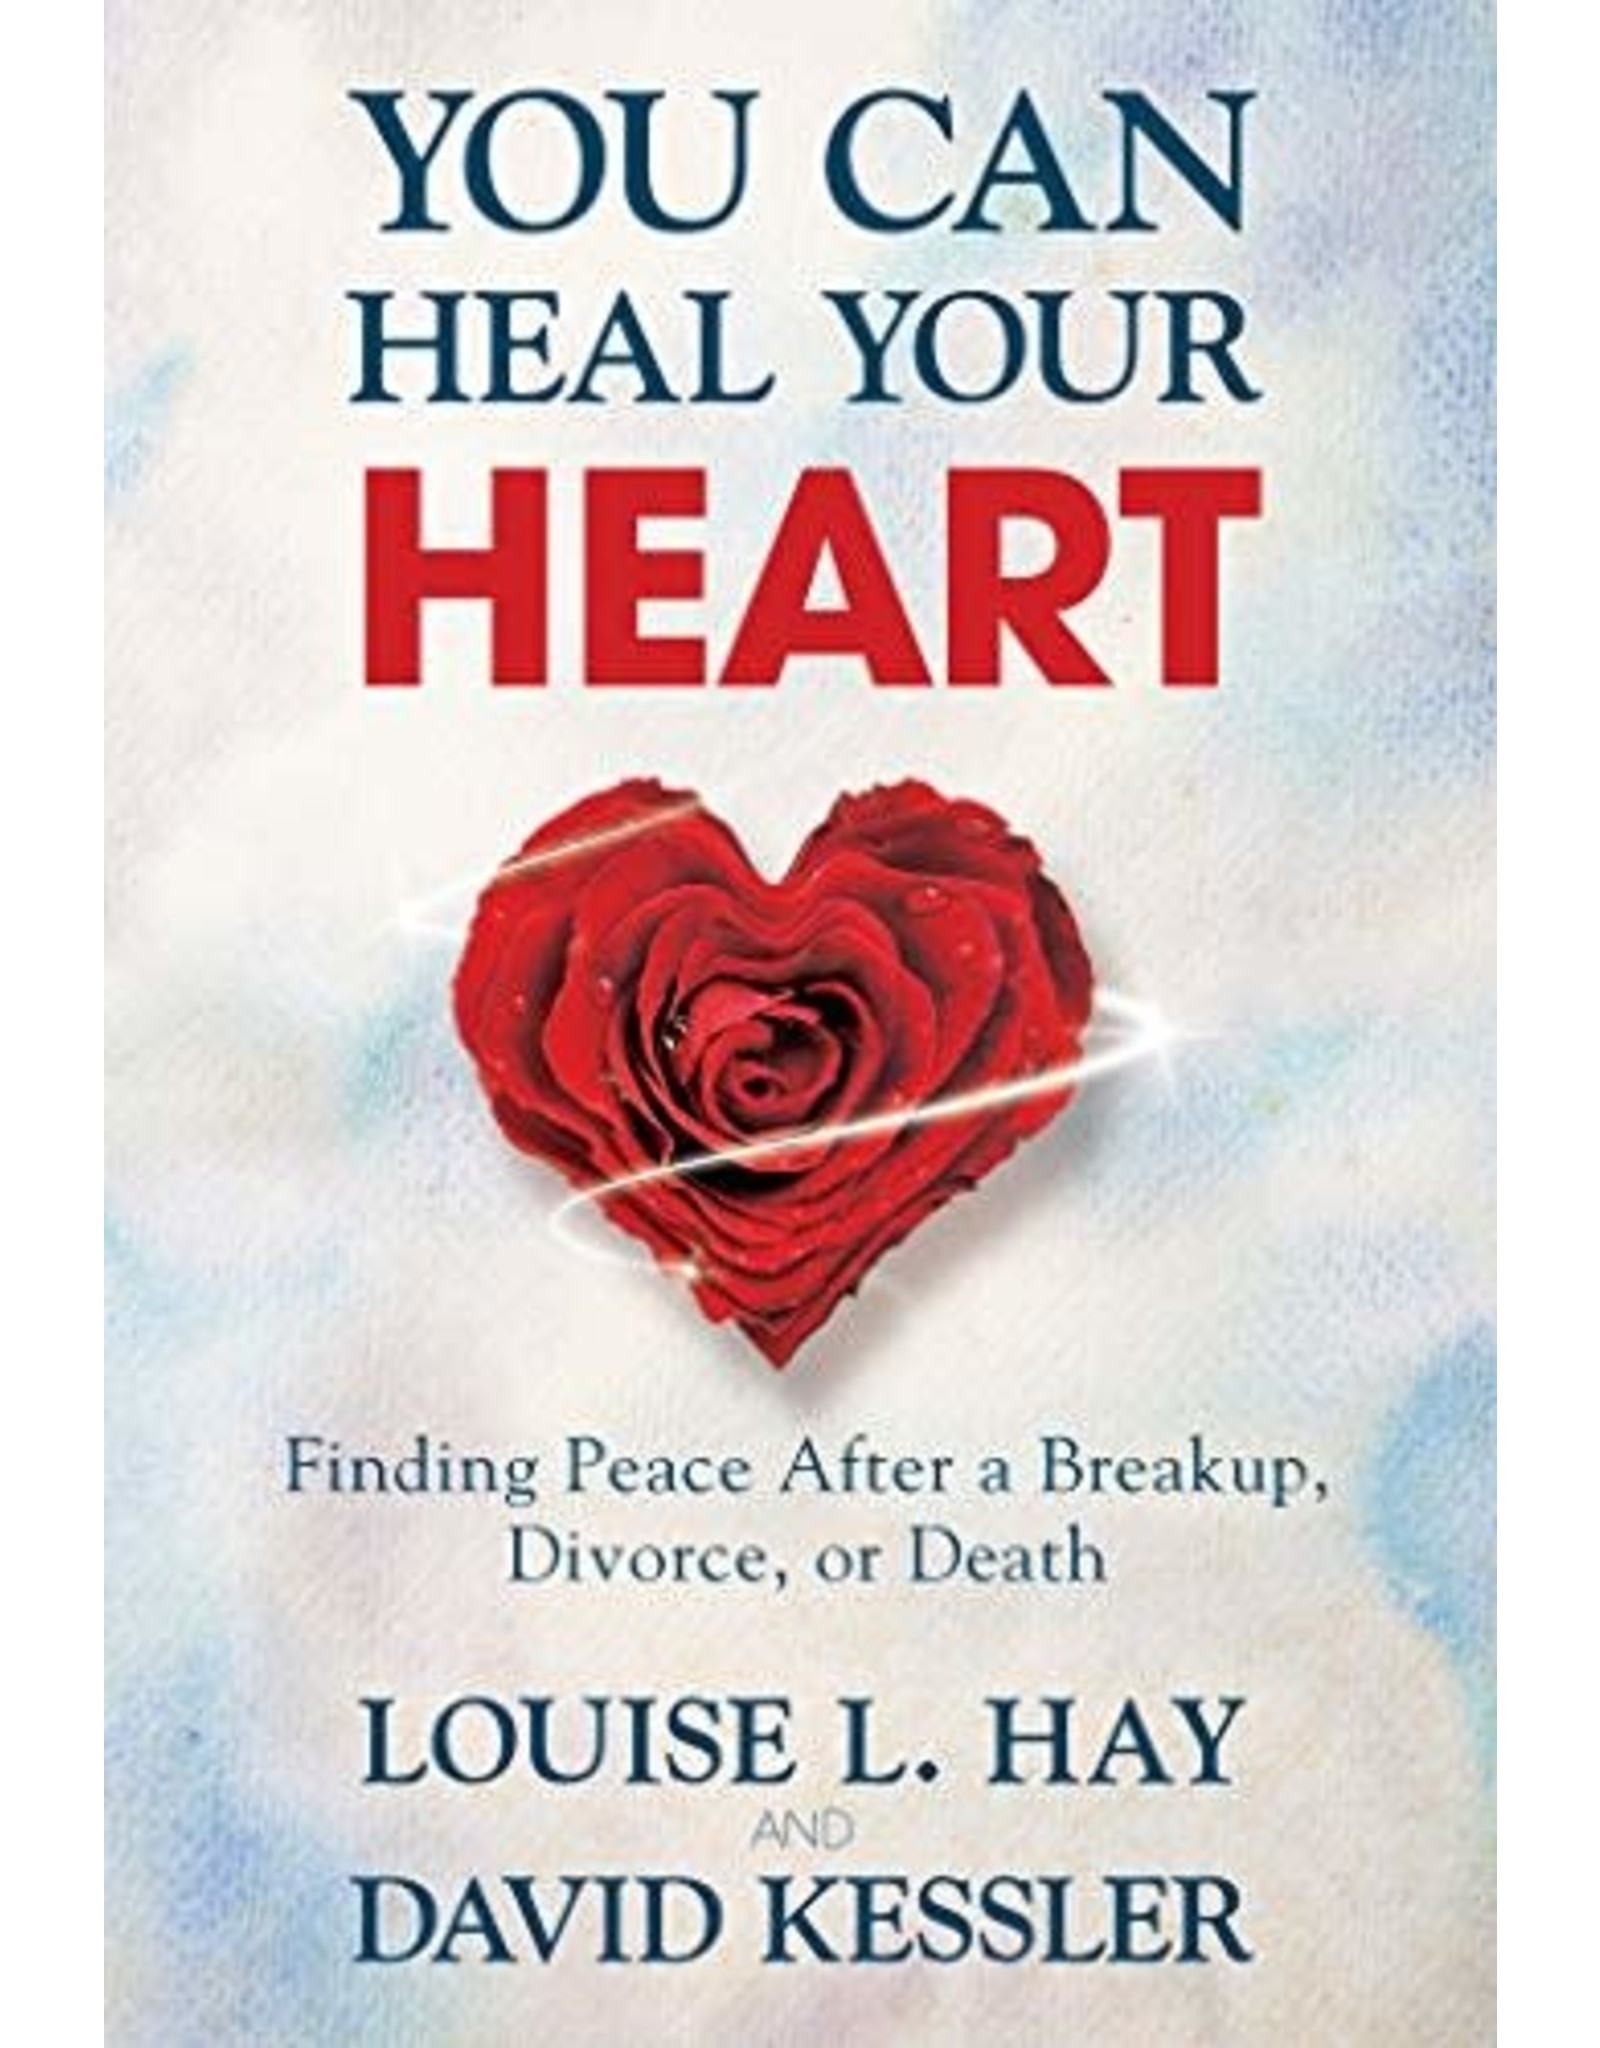 Brumby Sunstate You Can Heal Your Heart - Louise L. Hay and David Kessler